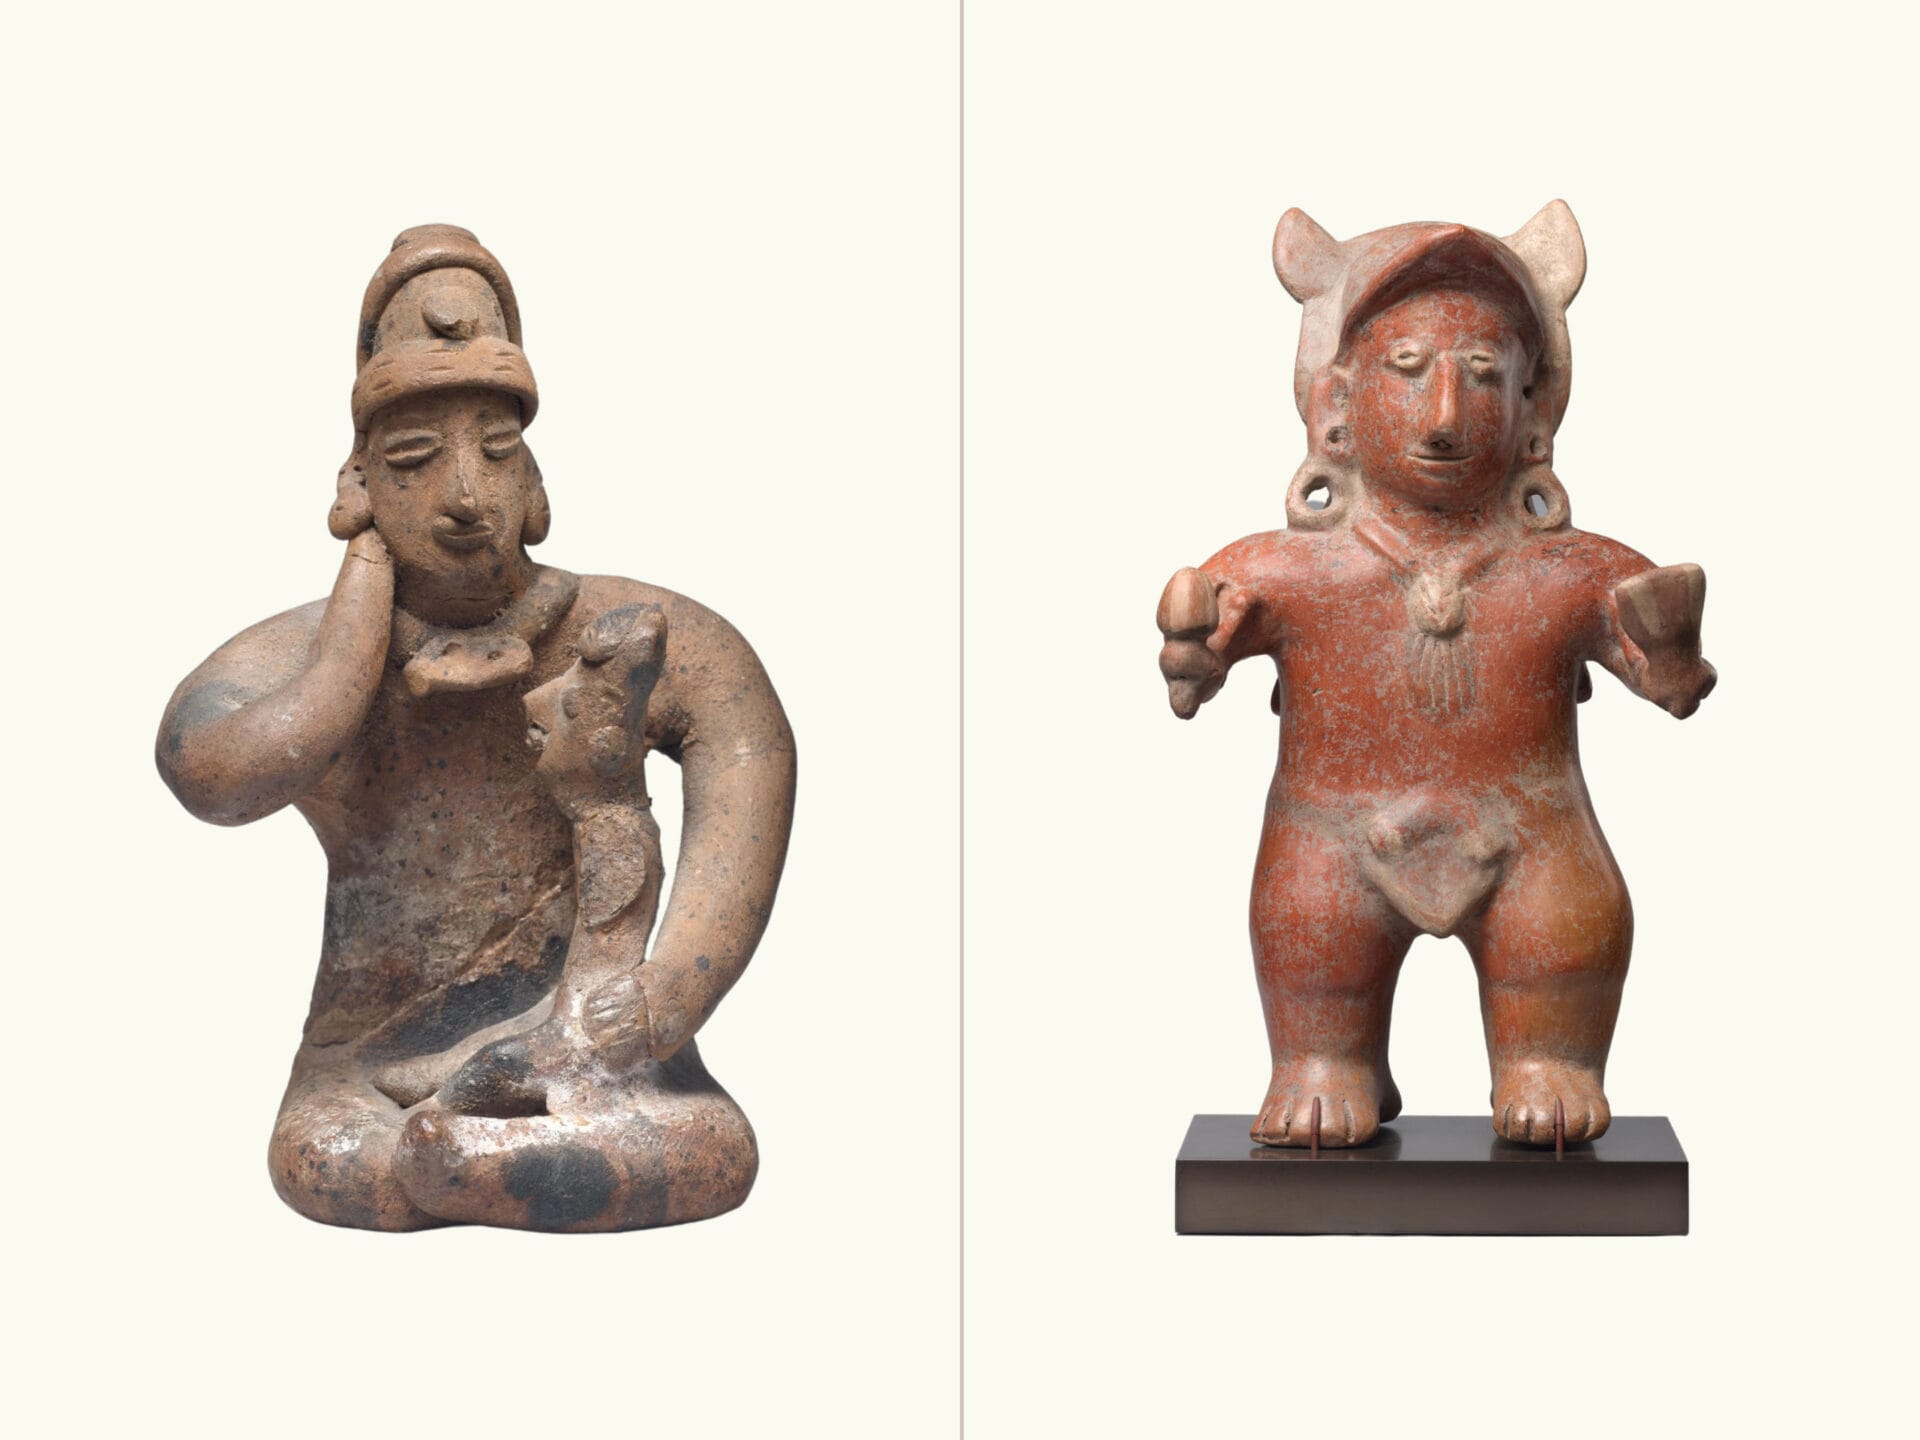 A comparison of two ceramic figures: beige figure sitting with a child (left) and a red figure adorned with accessories.